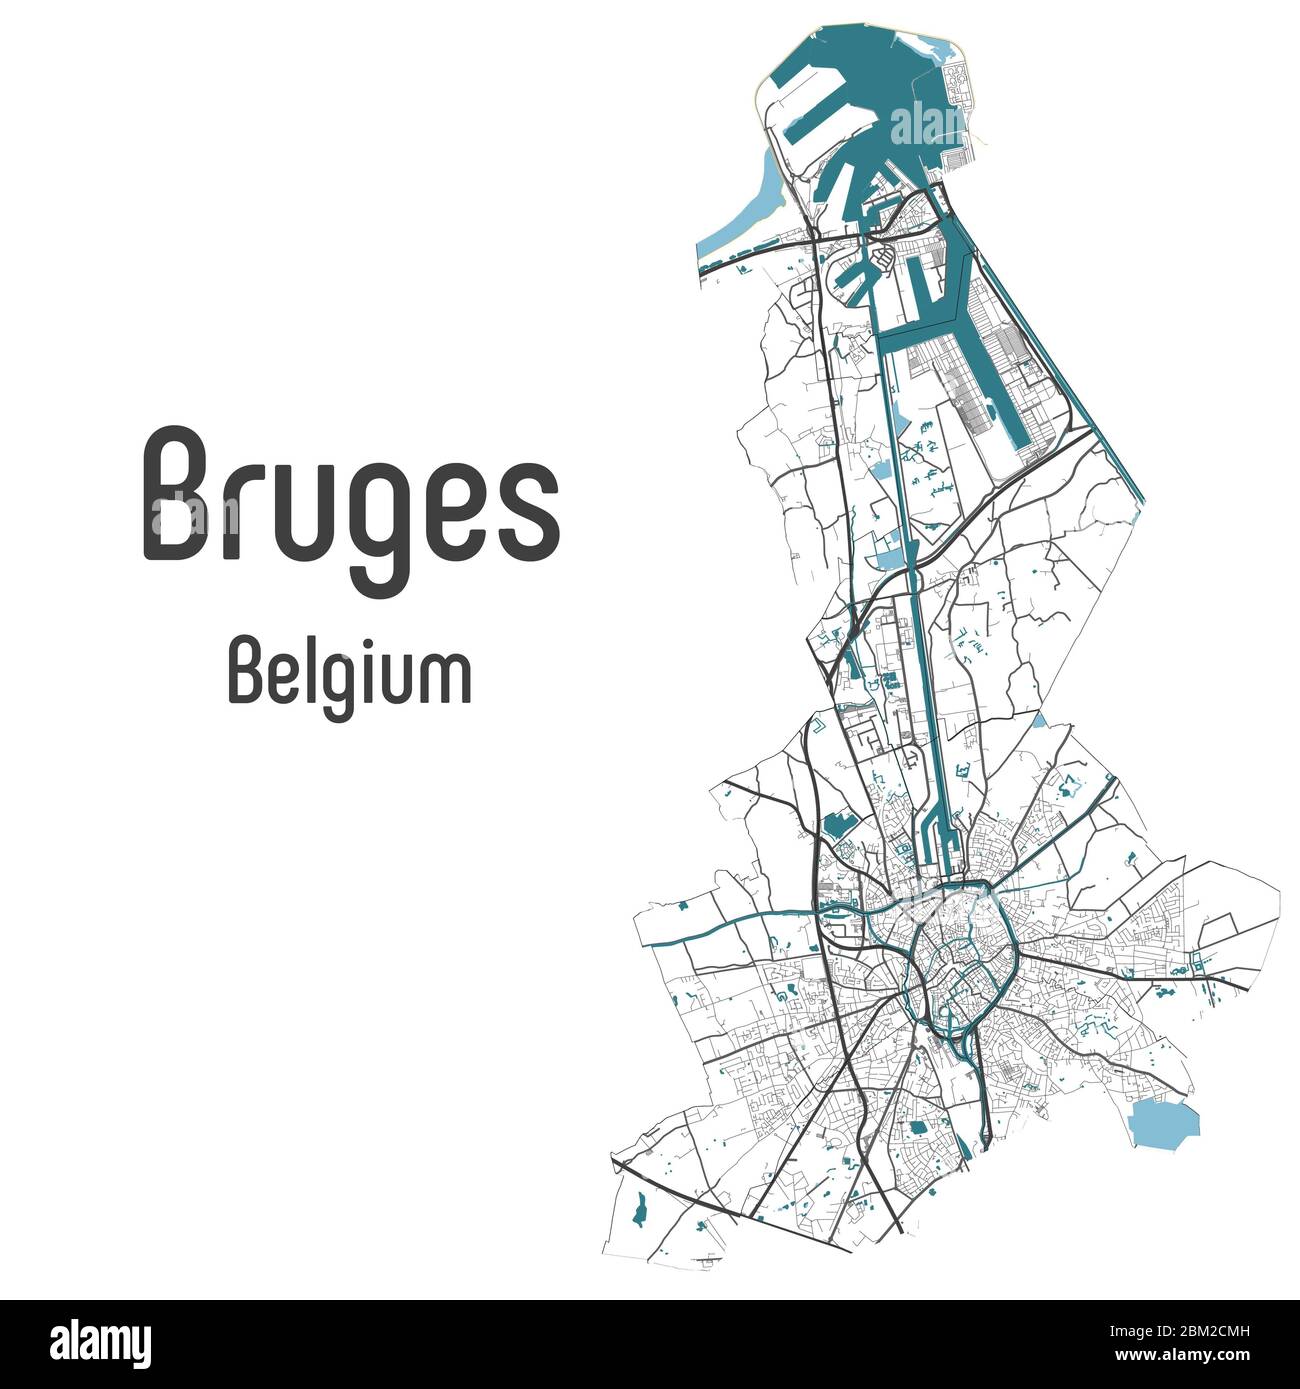 Bruges Brugge map with roads and rivers, city municipality administrative borders, art design with grey and blue on white background Stock Photo